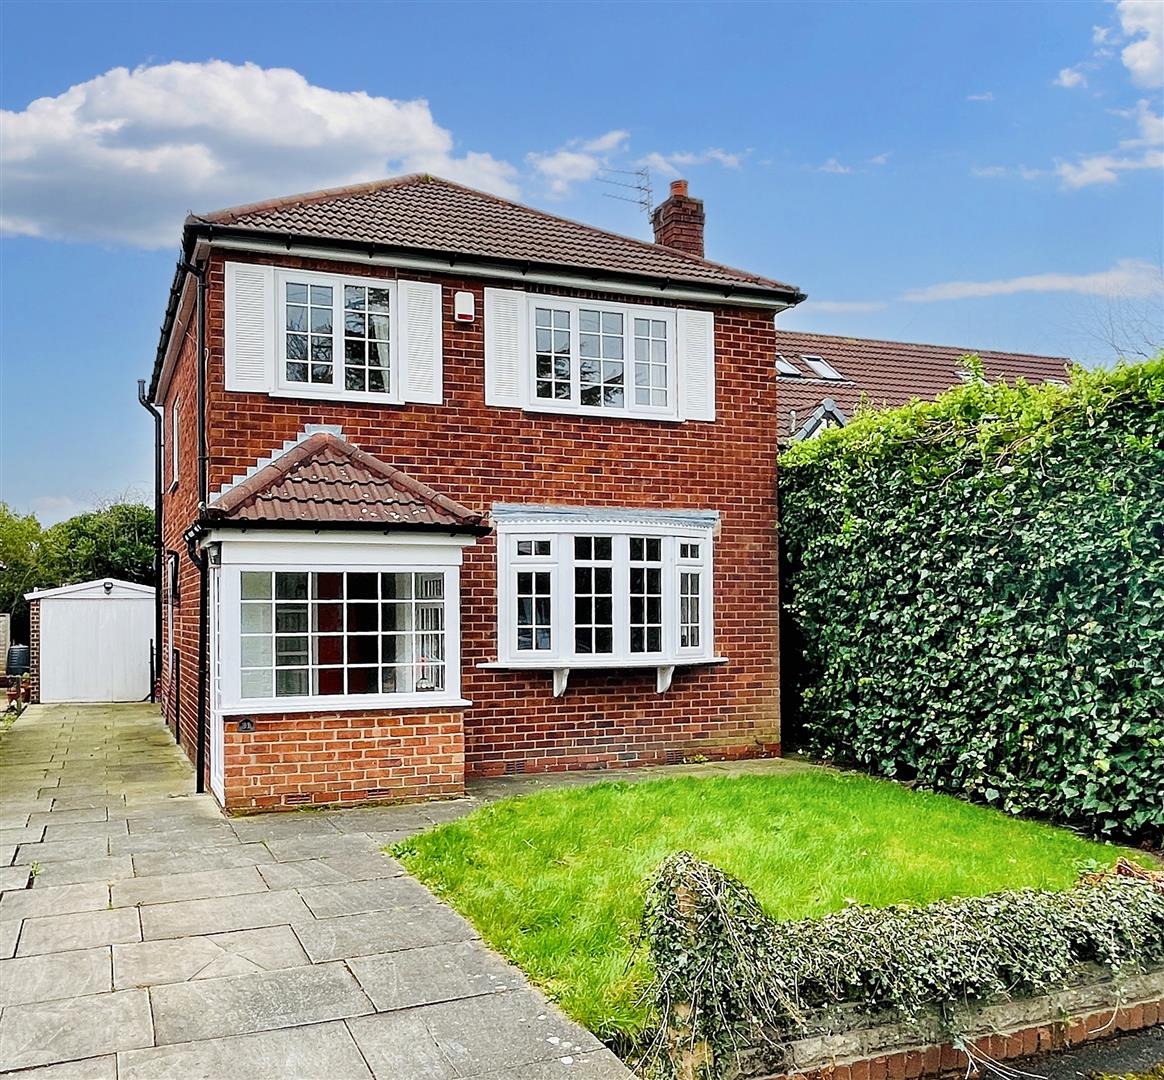 3 bed detached house for sale in Denson Road, Altrincham  - Property Image 1